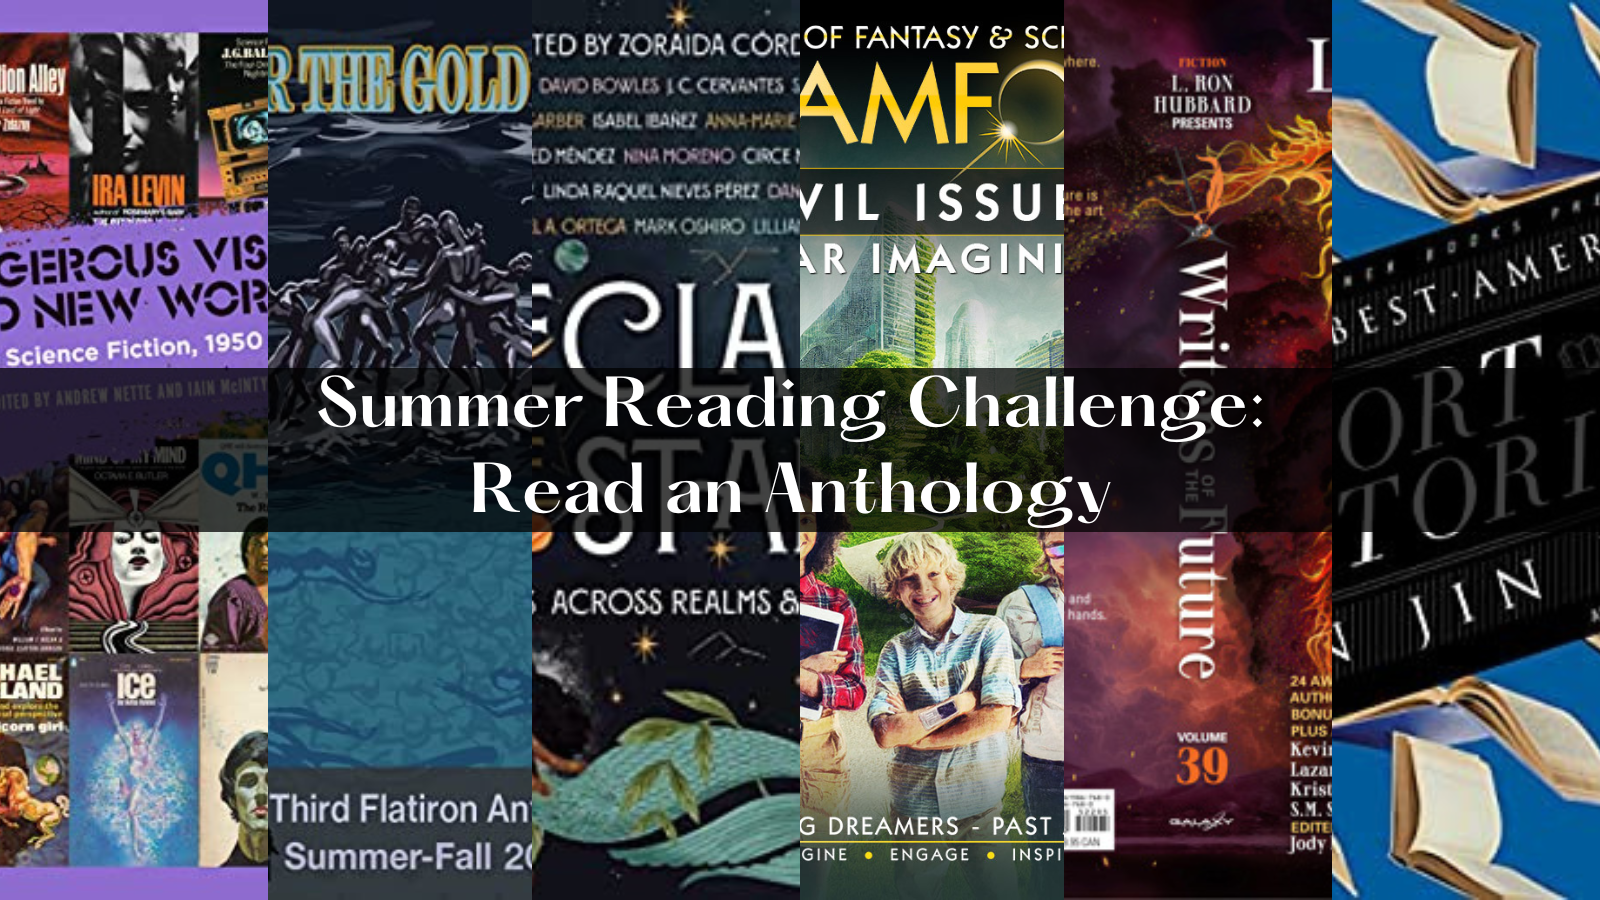 Summer Reading Challenge: Read an Anthology